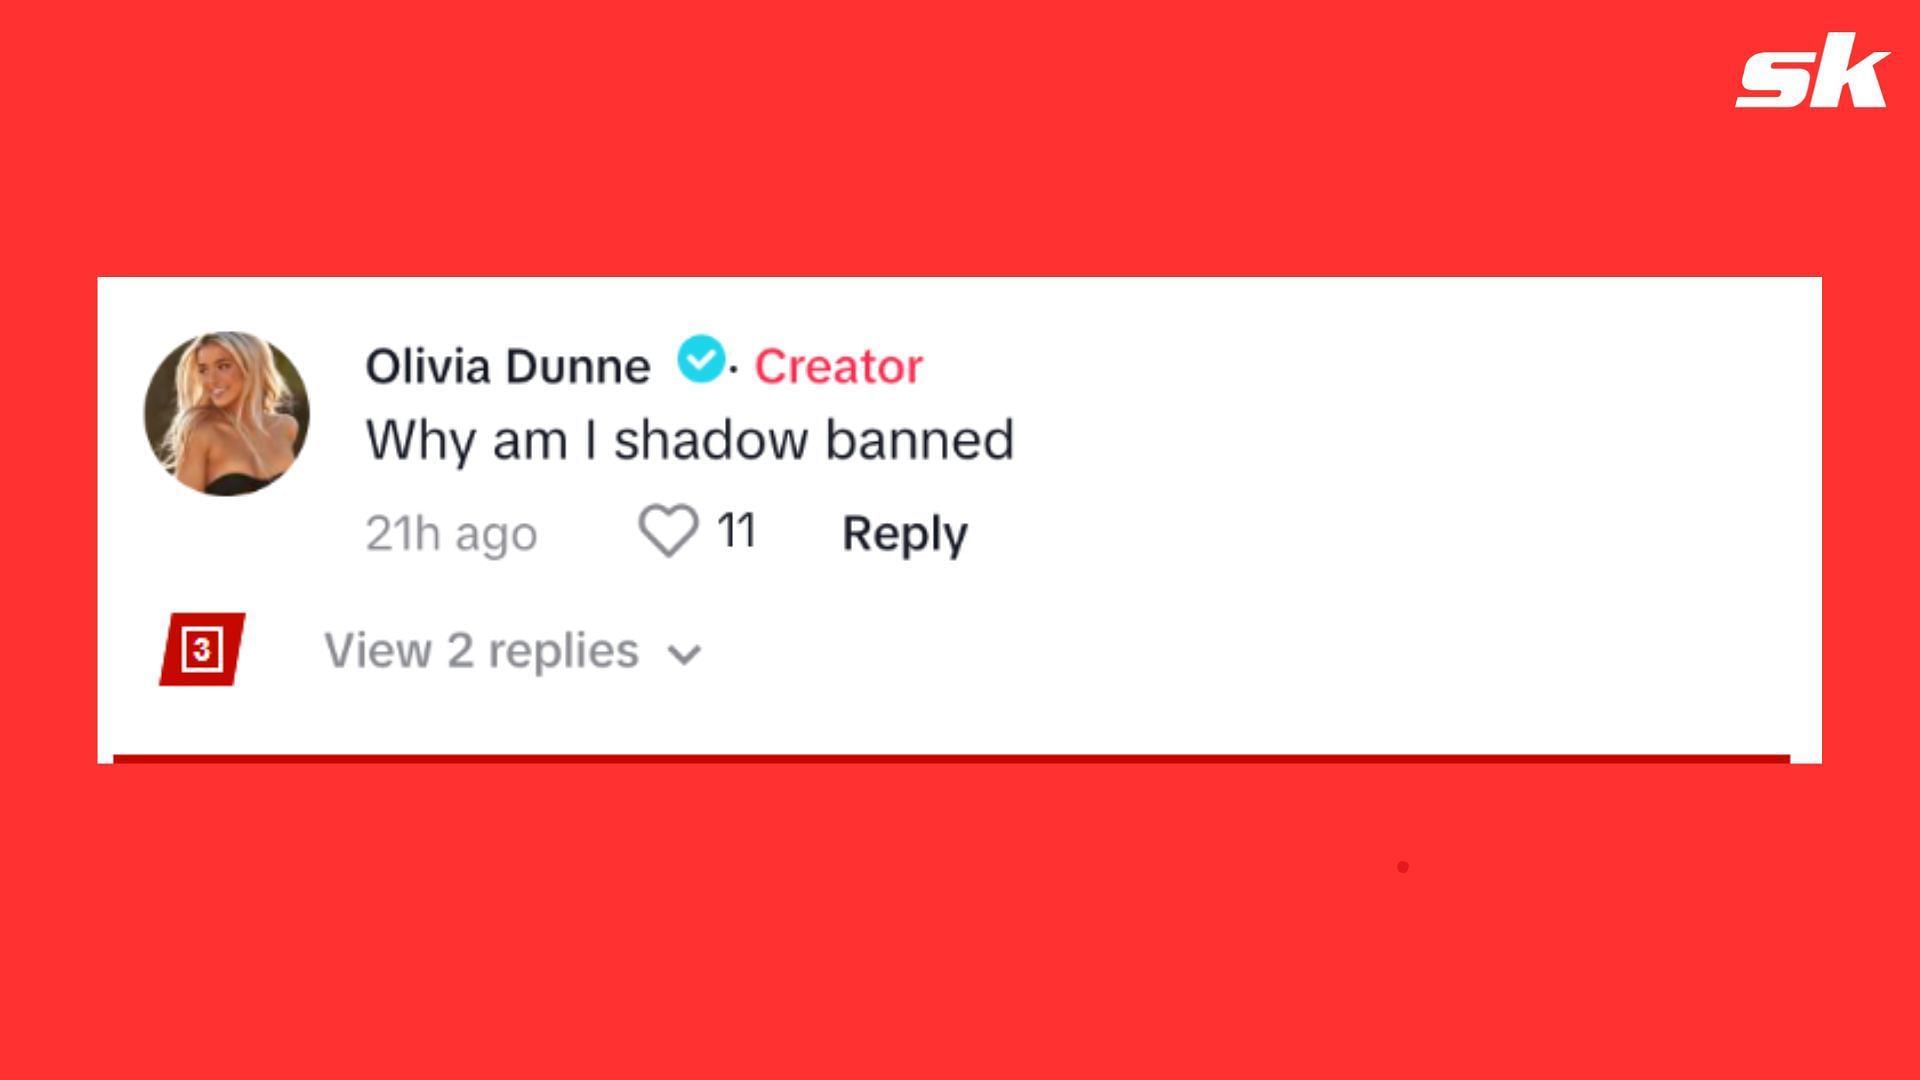 Olivia Dunne asked TikTok about her post engagement